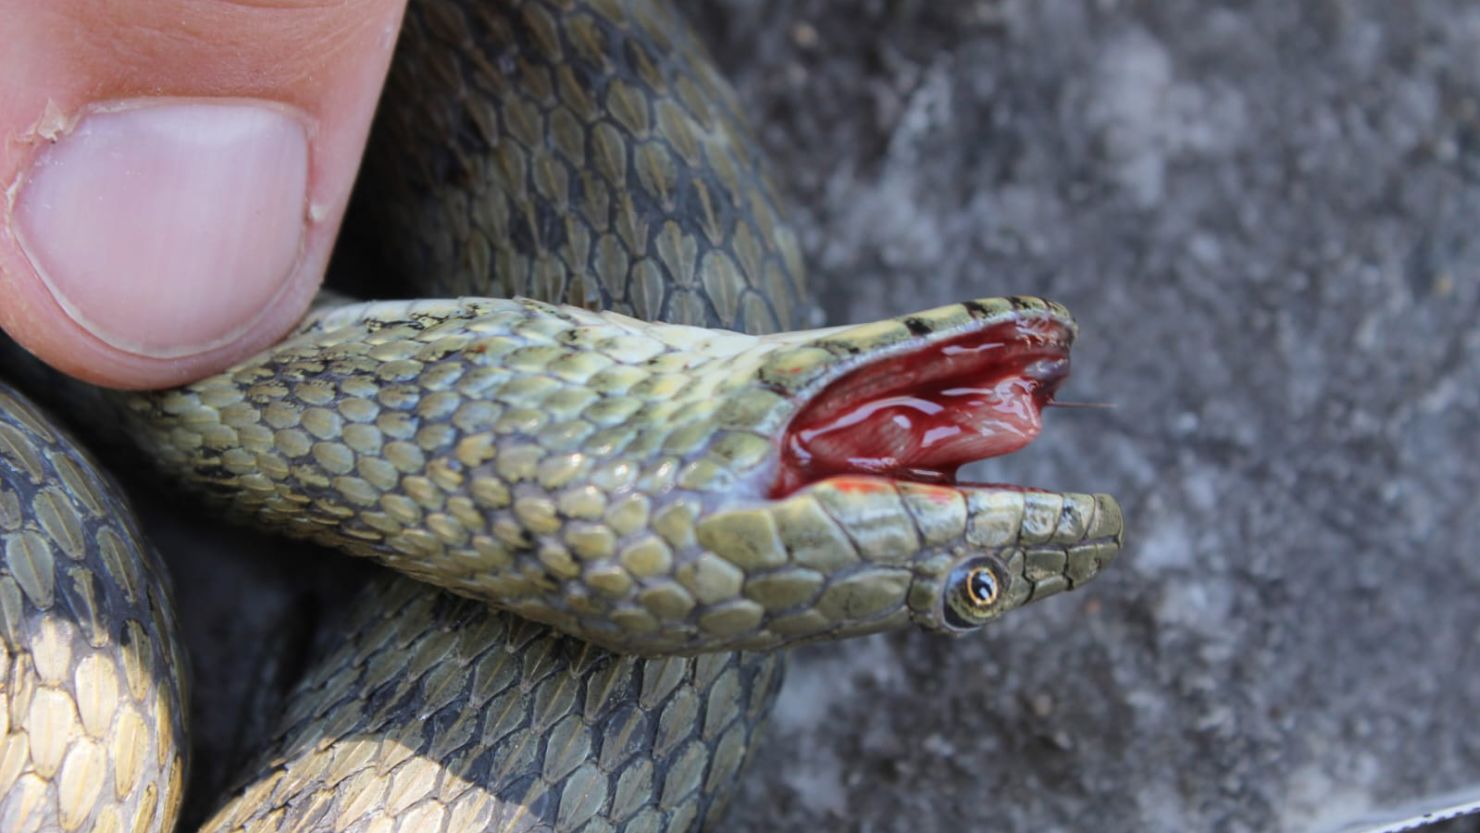 Dice snakes can smear themselves with feces and ooze blood from their mouths to deter predators.